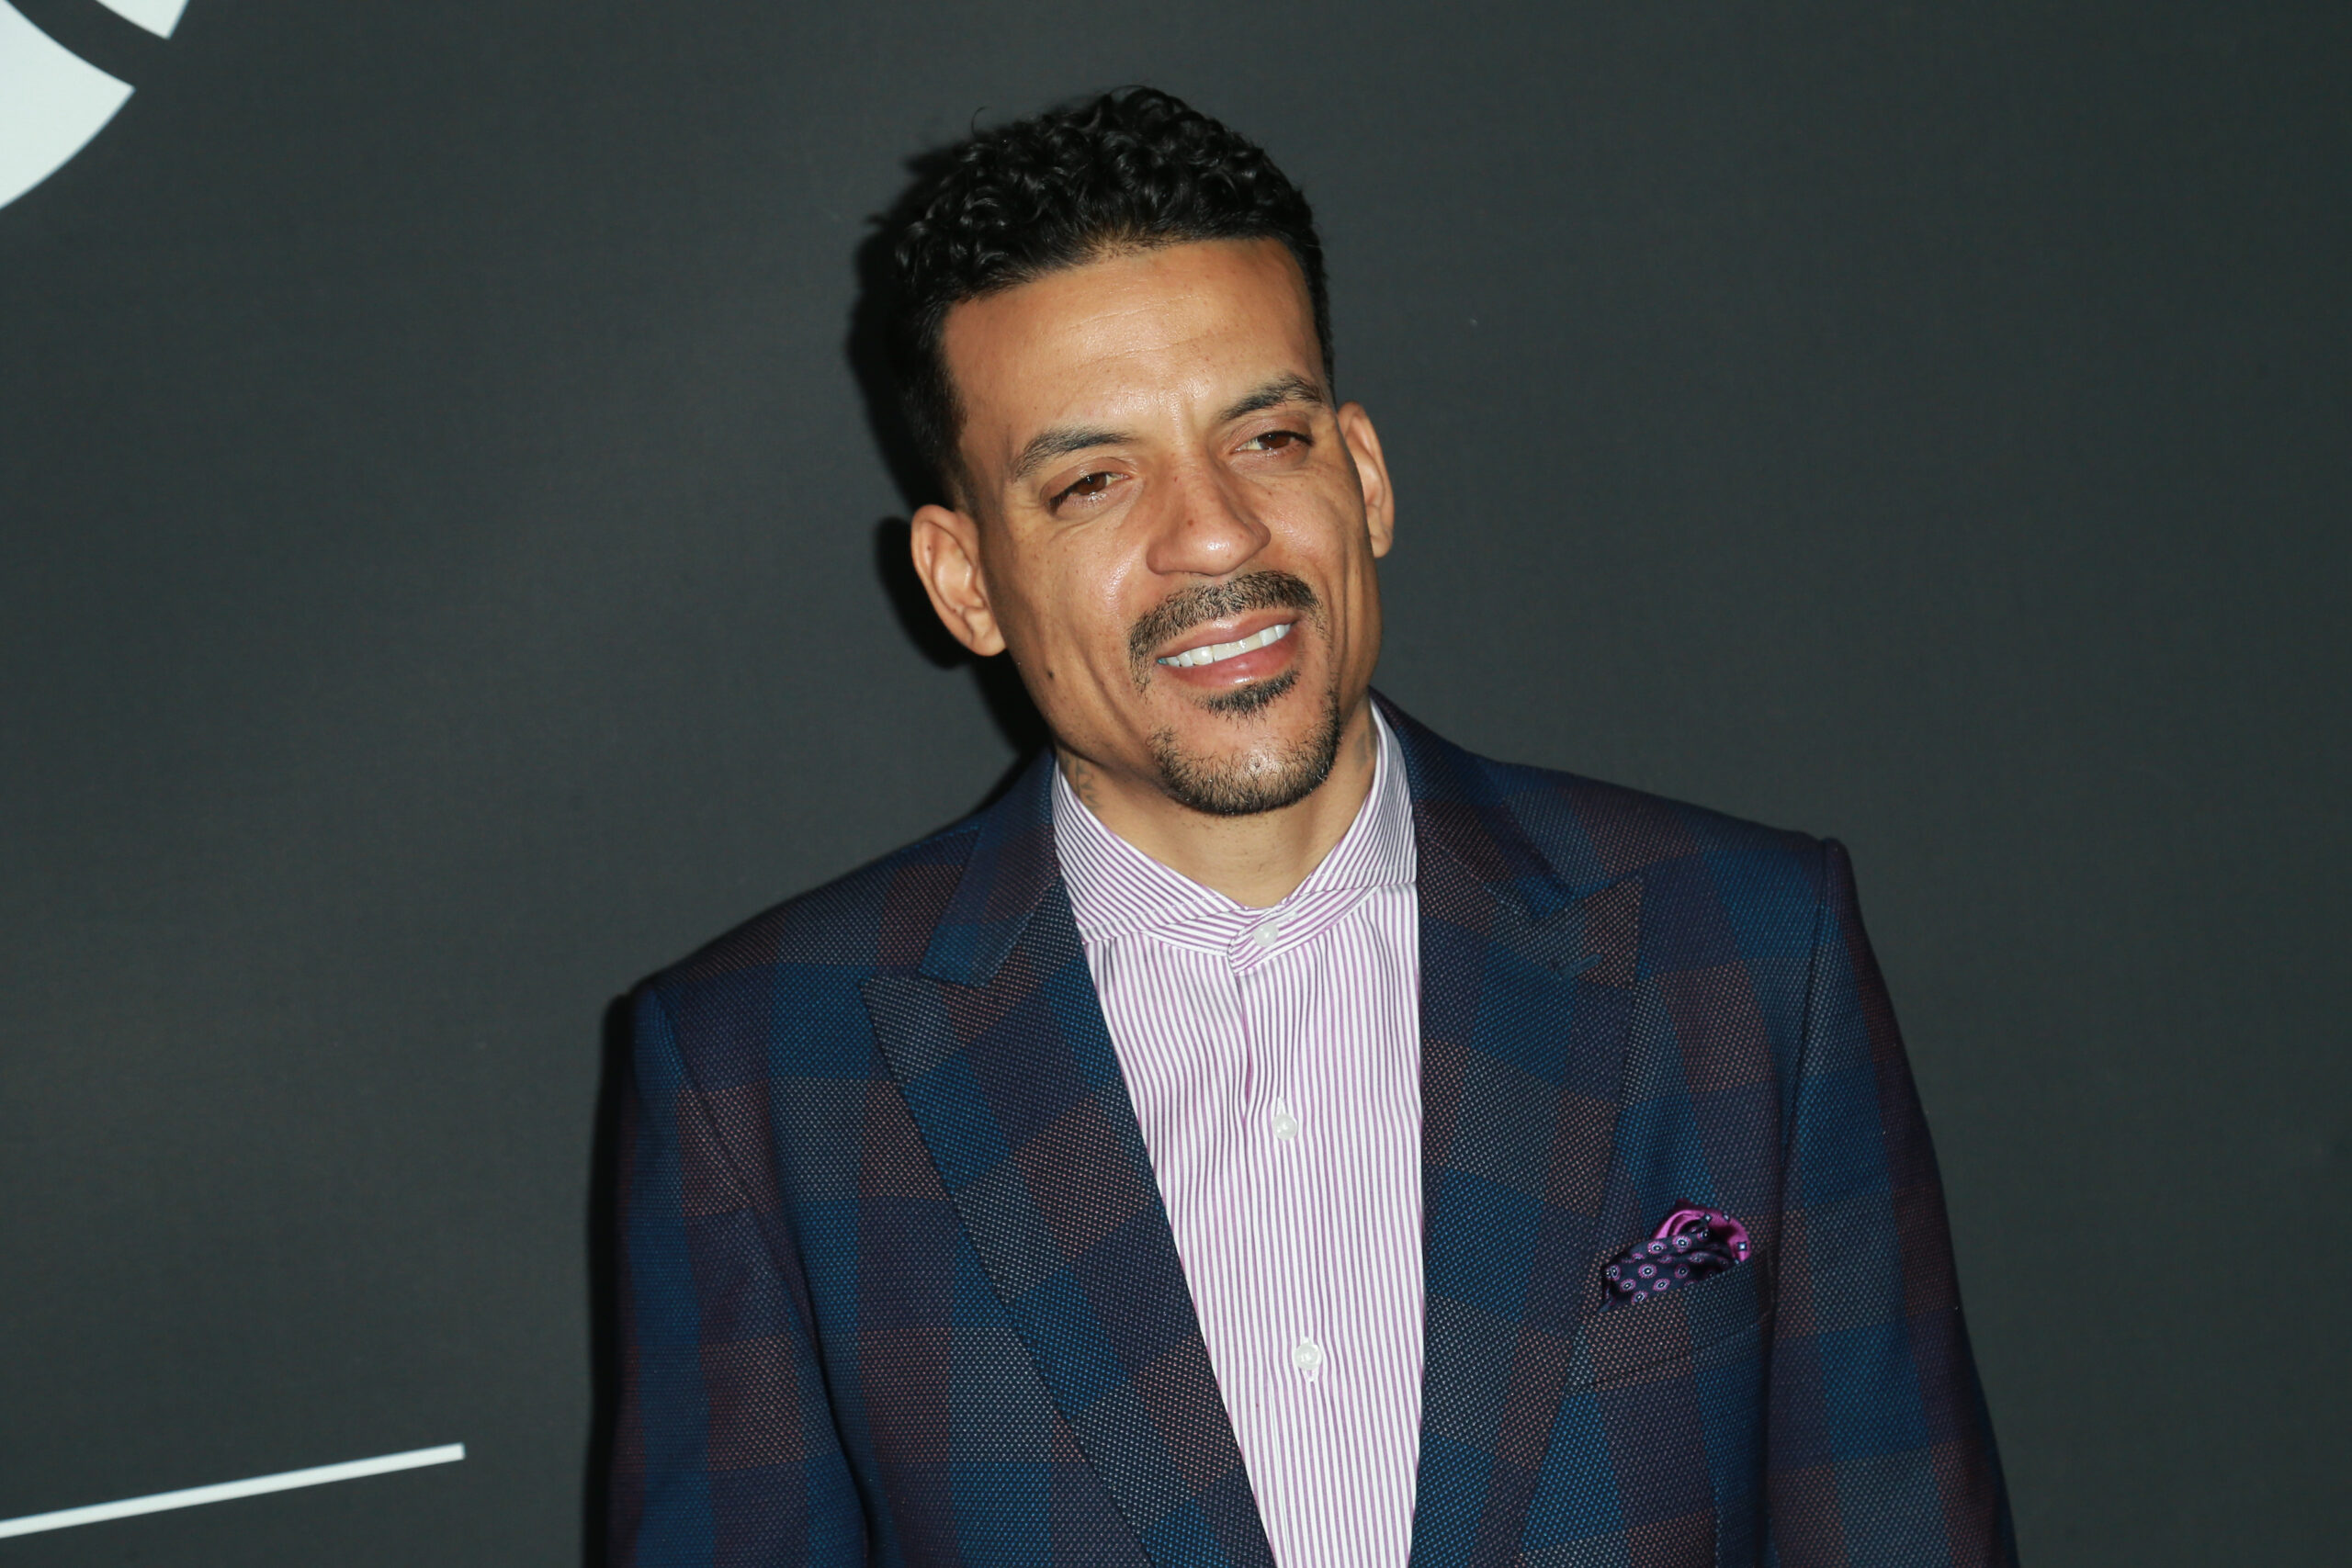 ‘Sports is Different ‘: NBA Champion Matt Barnes Disapproves of Trans Women Playing in WNBA